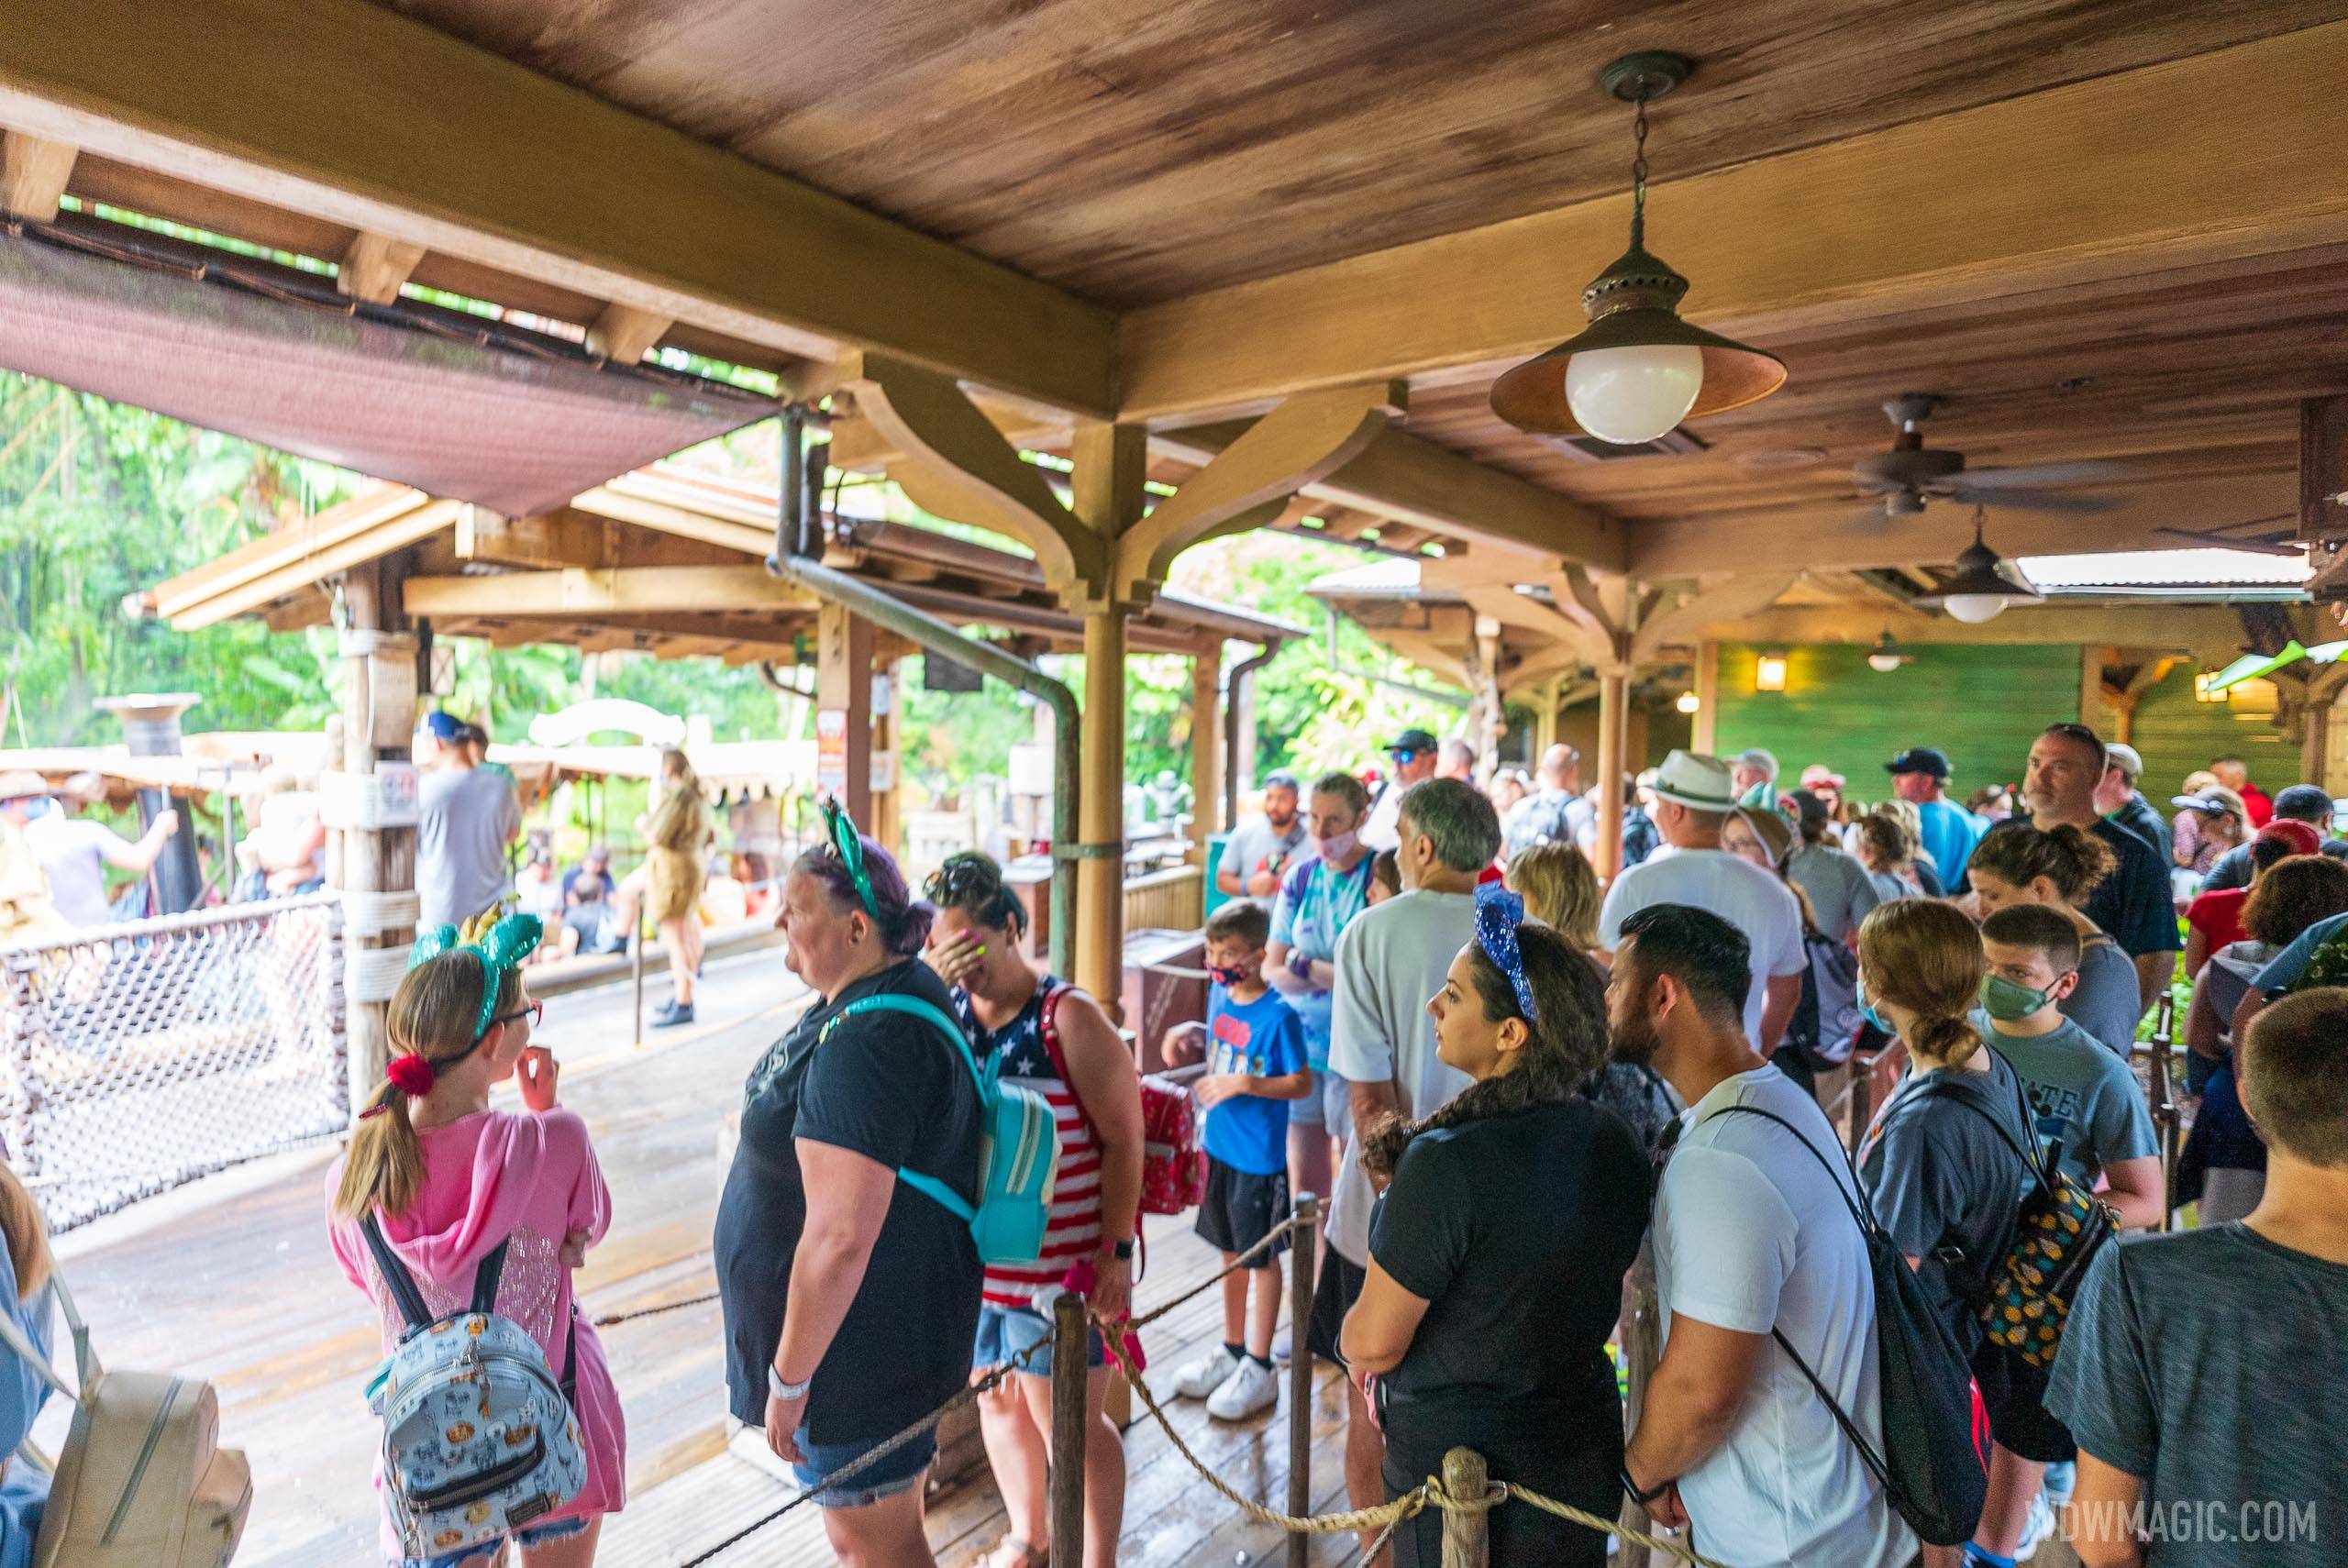 Disney removes mask requirements, barriers and physical distancing at Walt Disney World